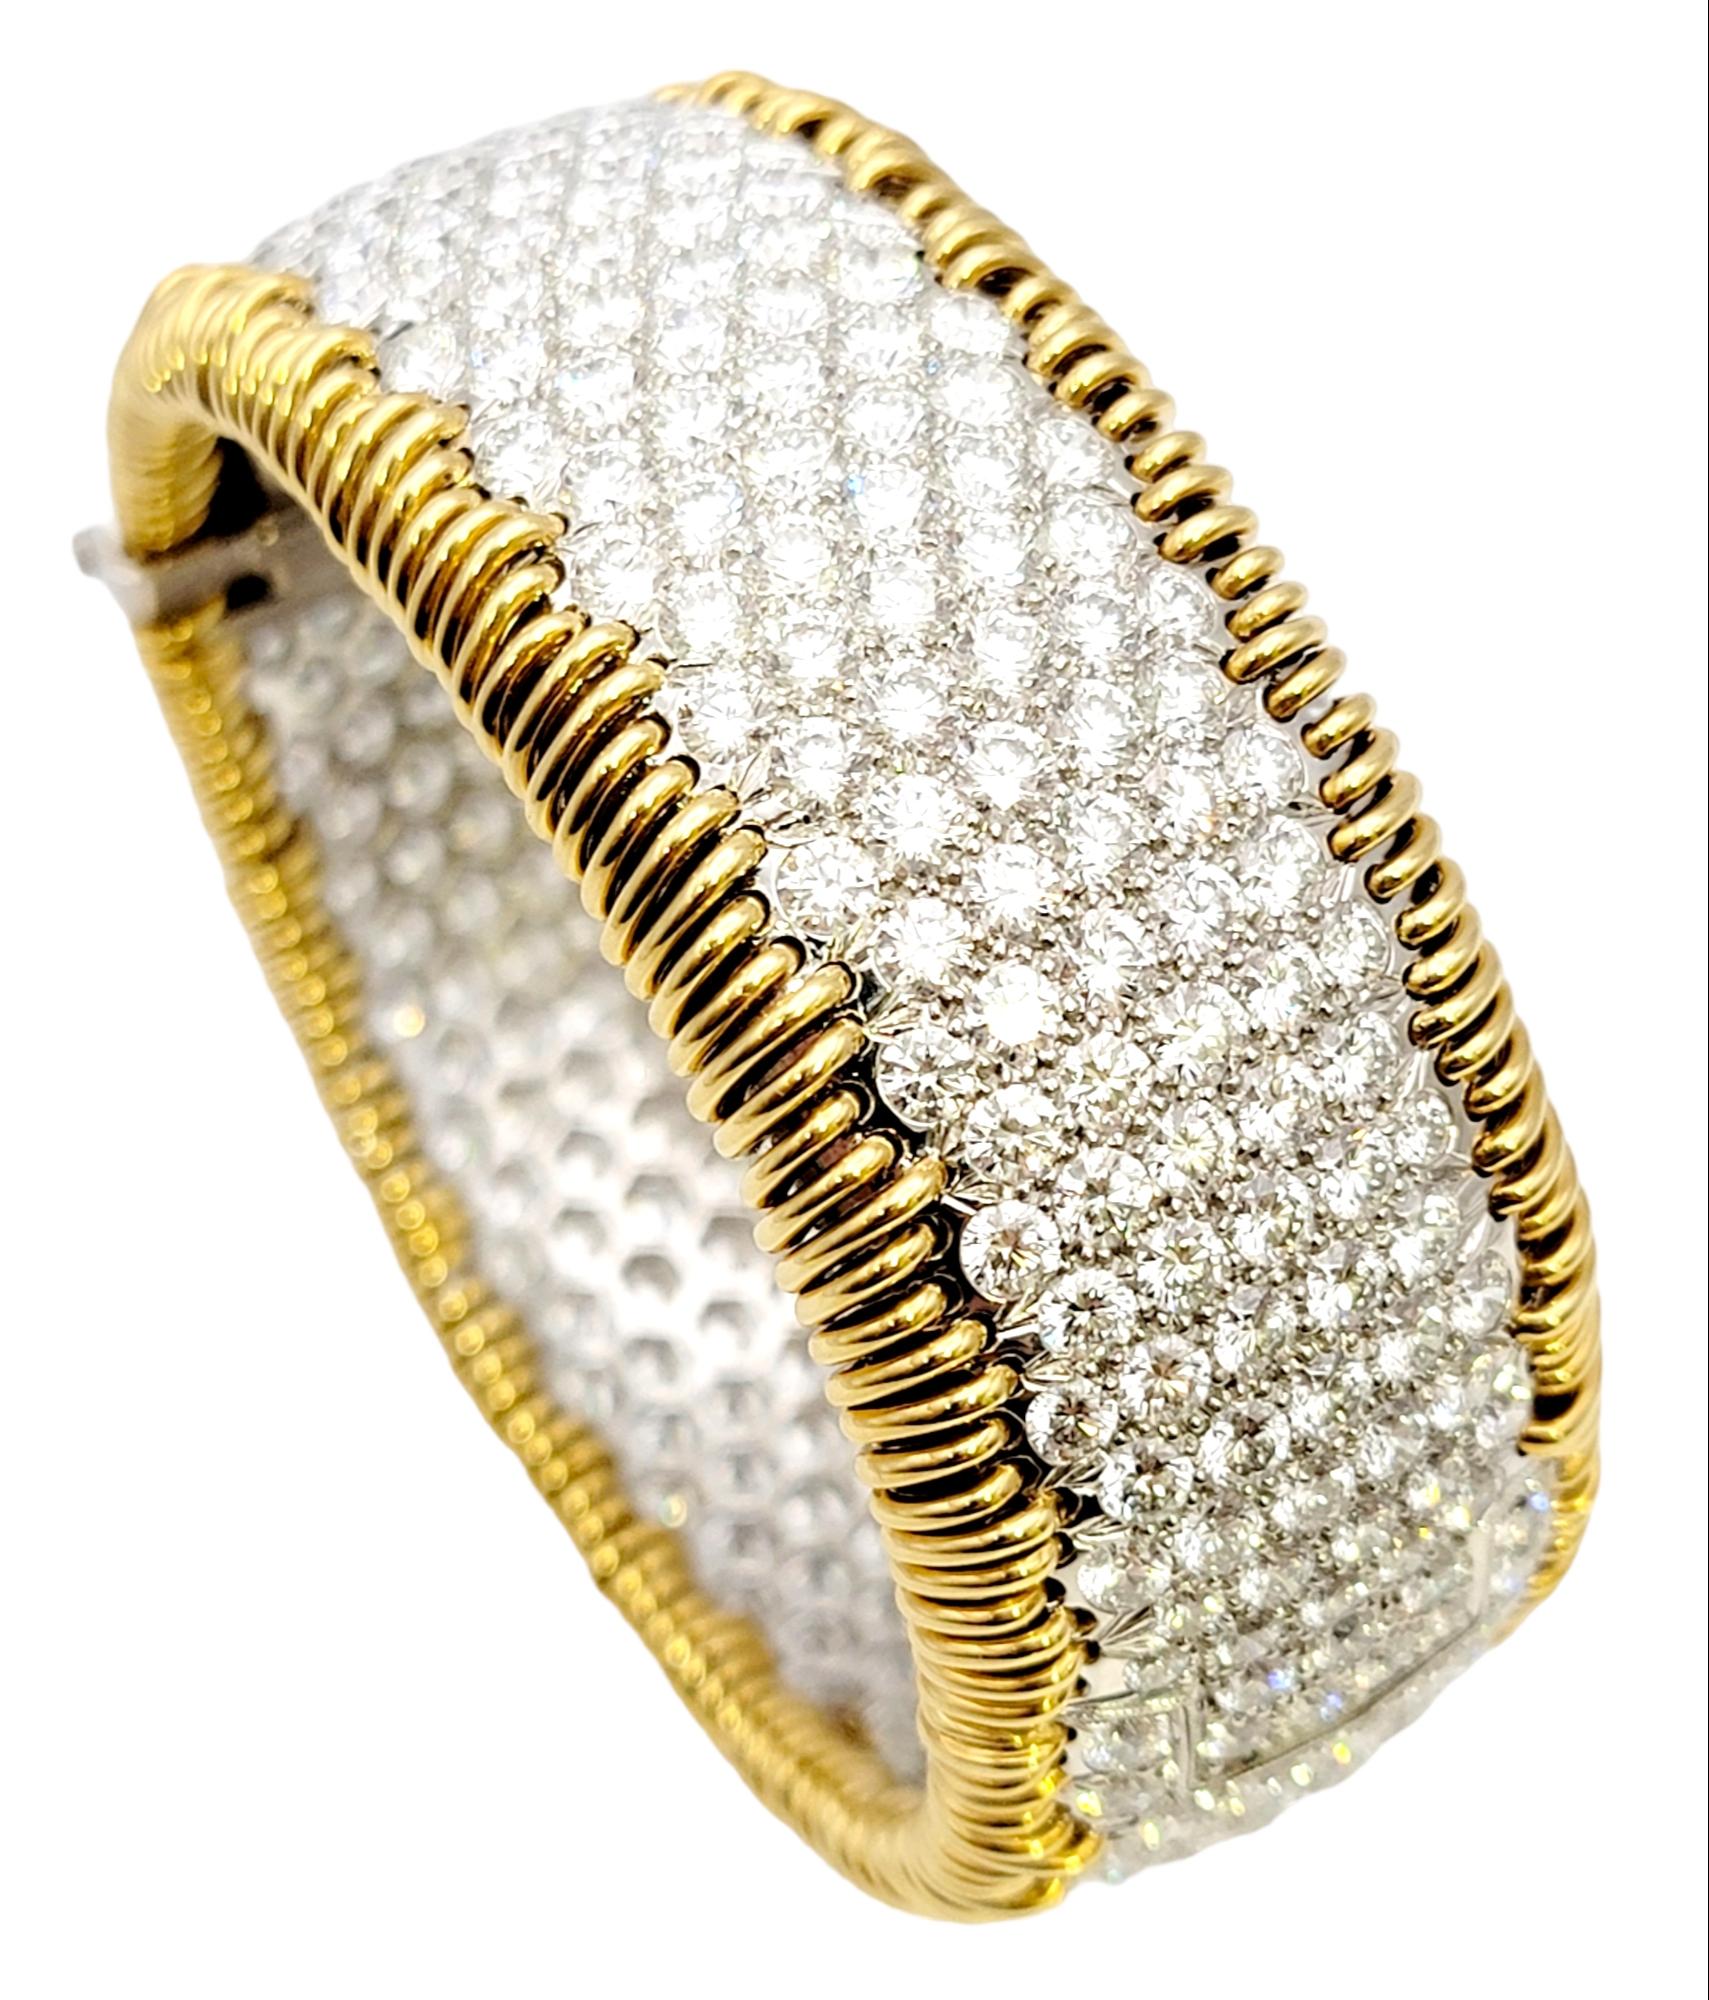 This rare and absolutely impeccable diamond bracelet designed by Jean Schlumberger for Tiffany & Co. is the true definition of modern luxury. Founded in 1837 in New York City, Tiffany & Co. is one of the world's most storied luxury design houses